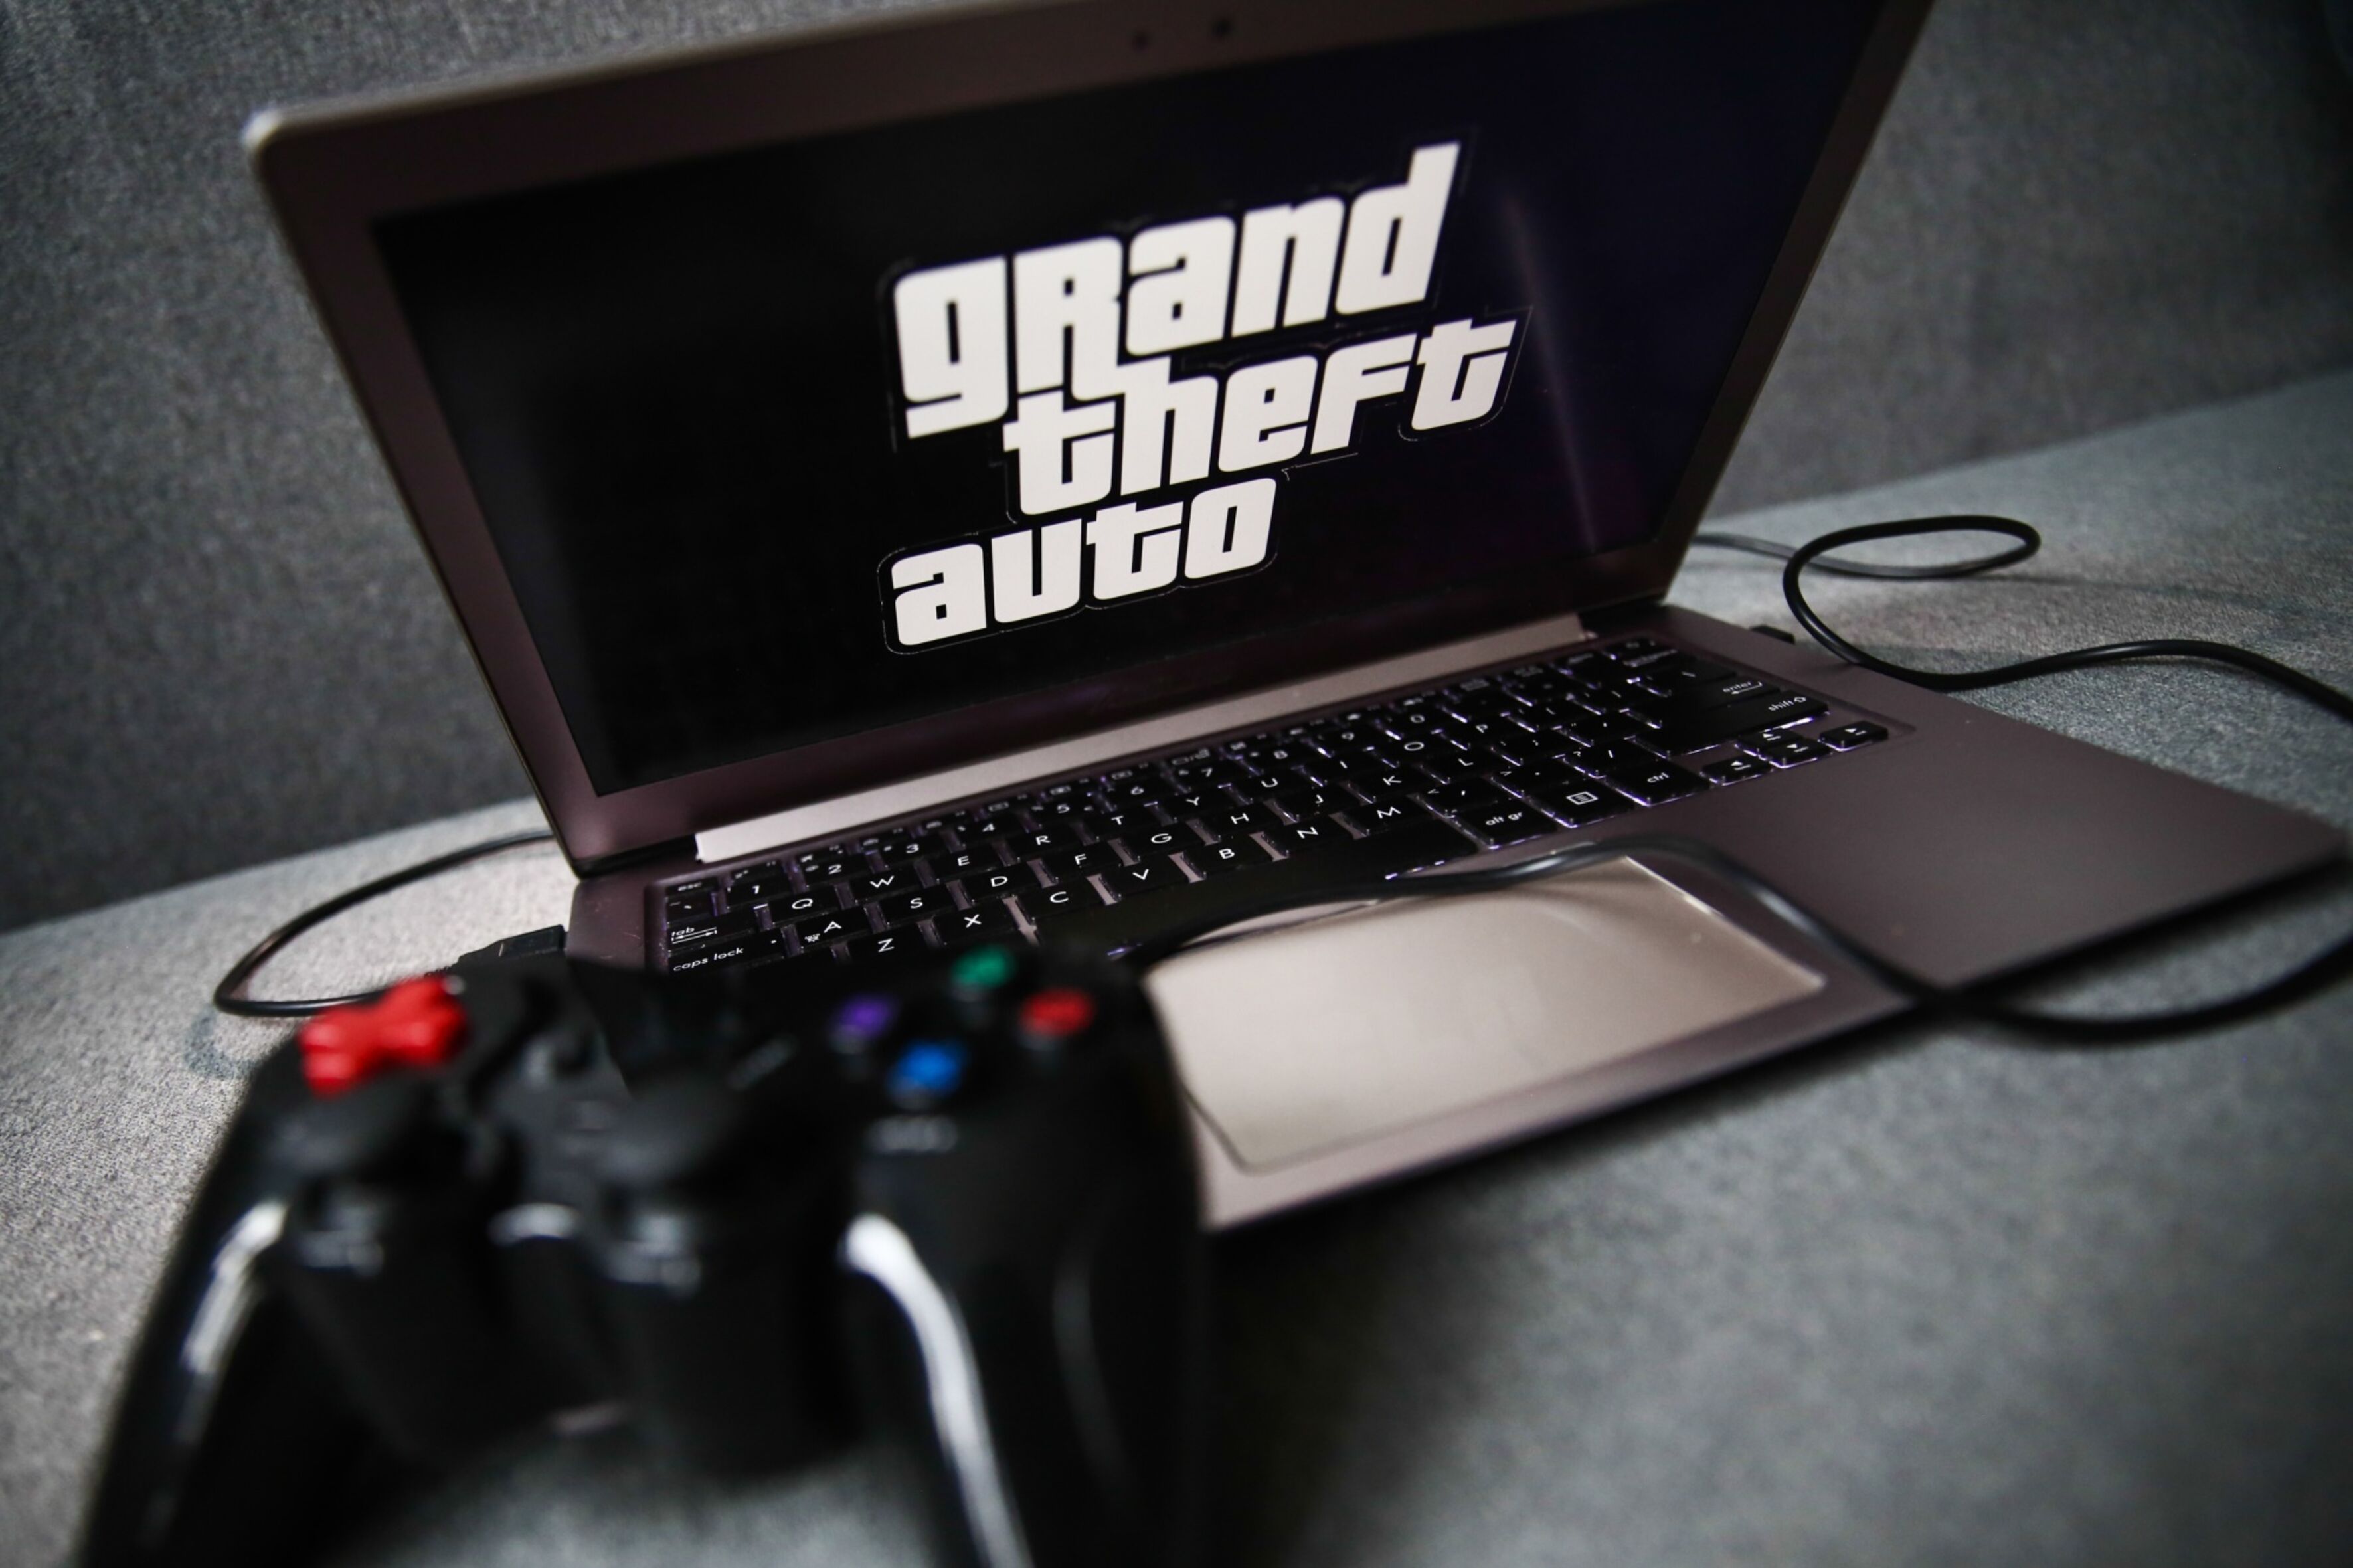 Rockstar plans to announce the highly anticipated “Grand Theft Auto VI” game